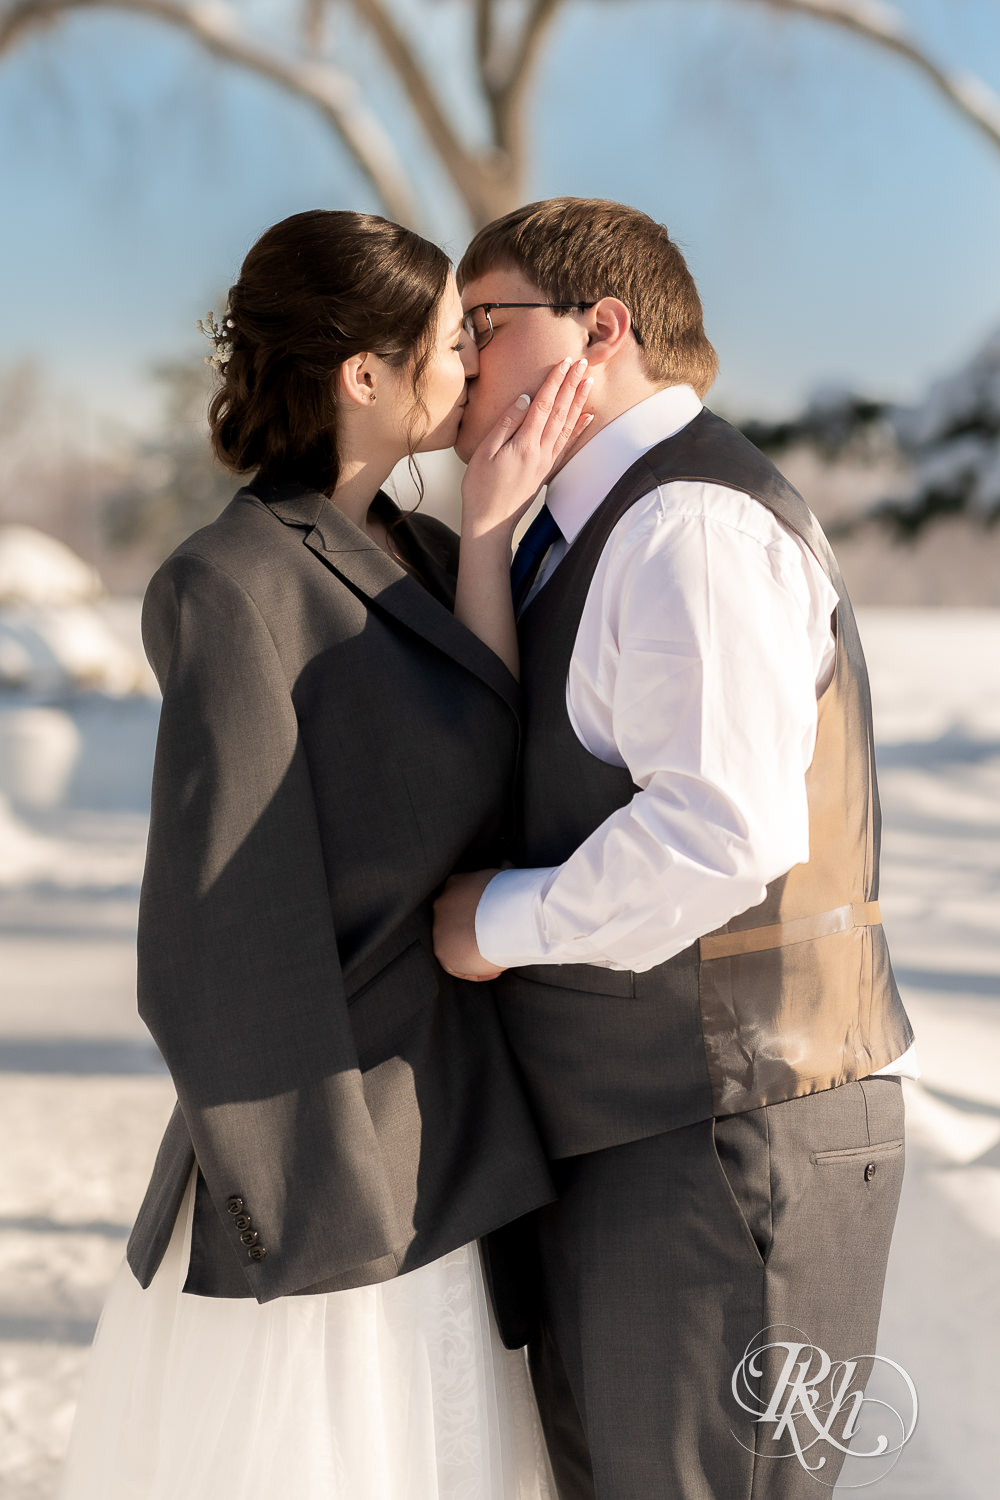 Bride and groom kissing in snow outside at Minneapolis Golf Club in Saint Louis Park, Minnesota.